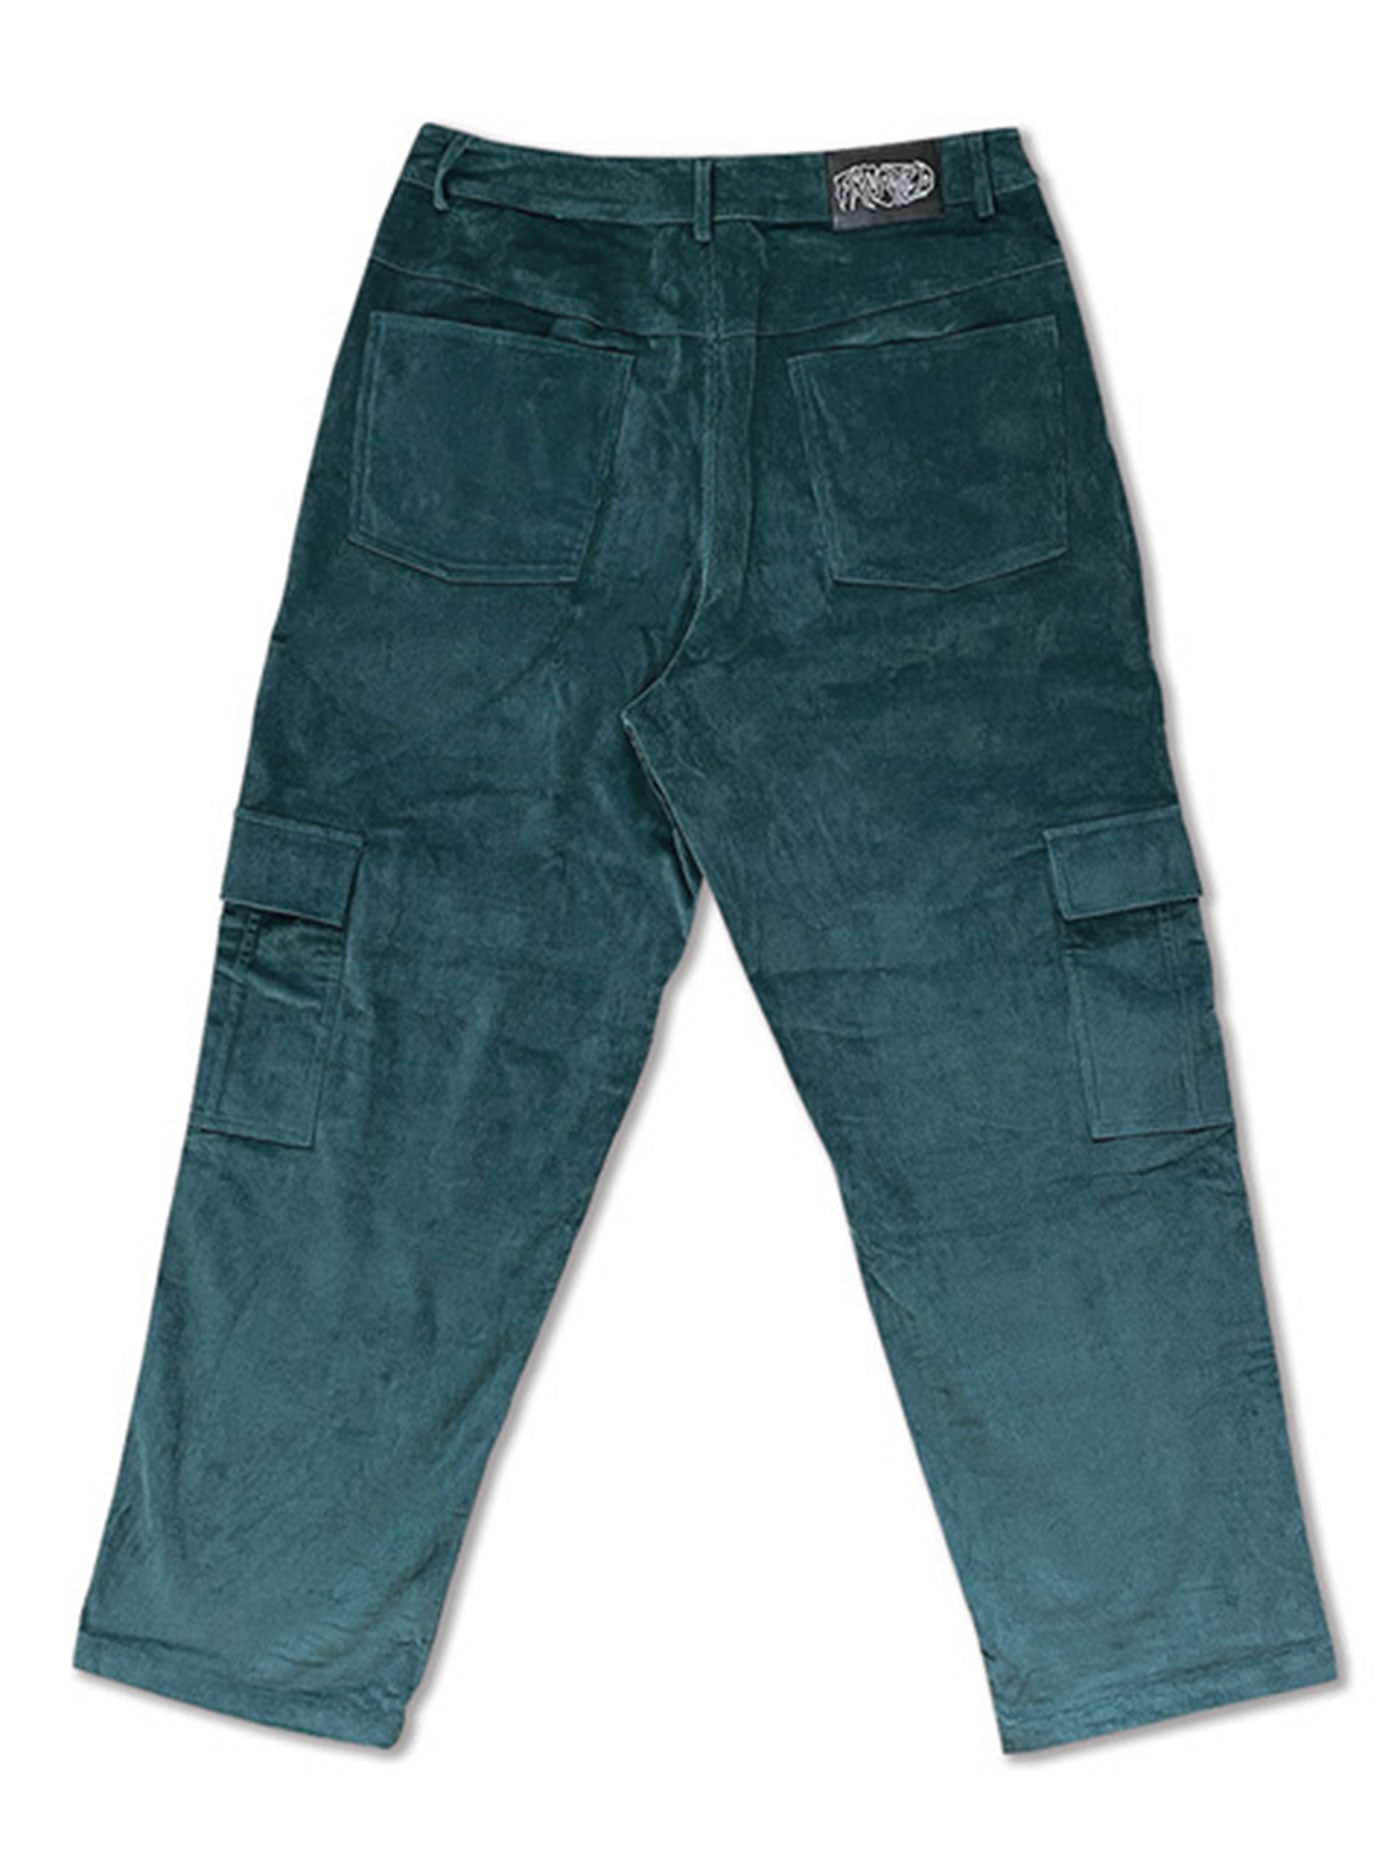 Frosted Skateboards Cargo Corduroy Pants